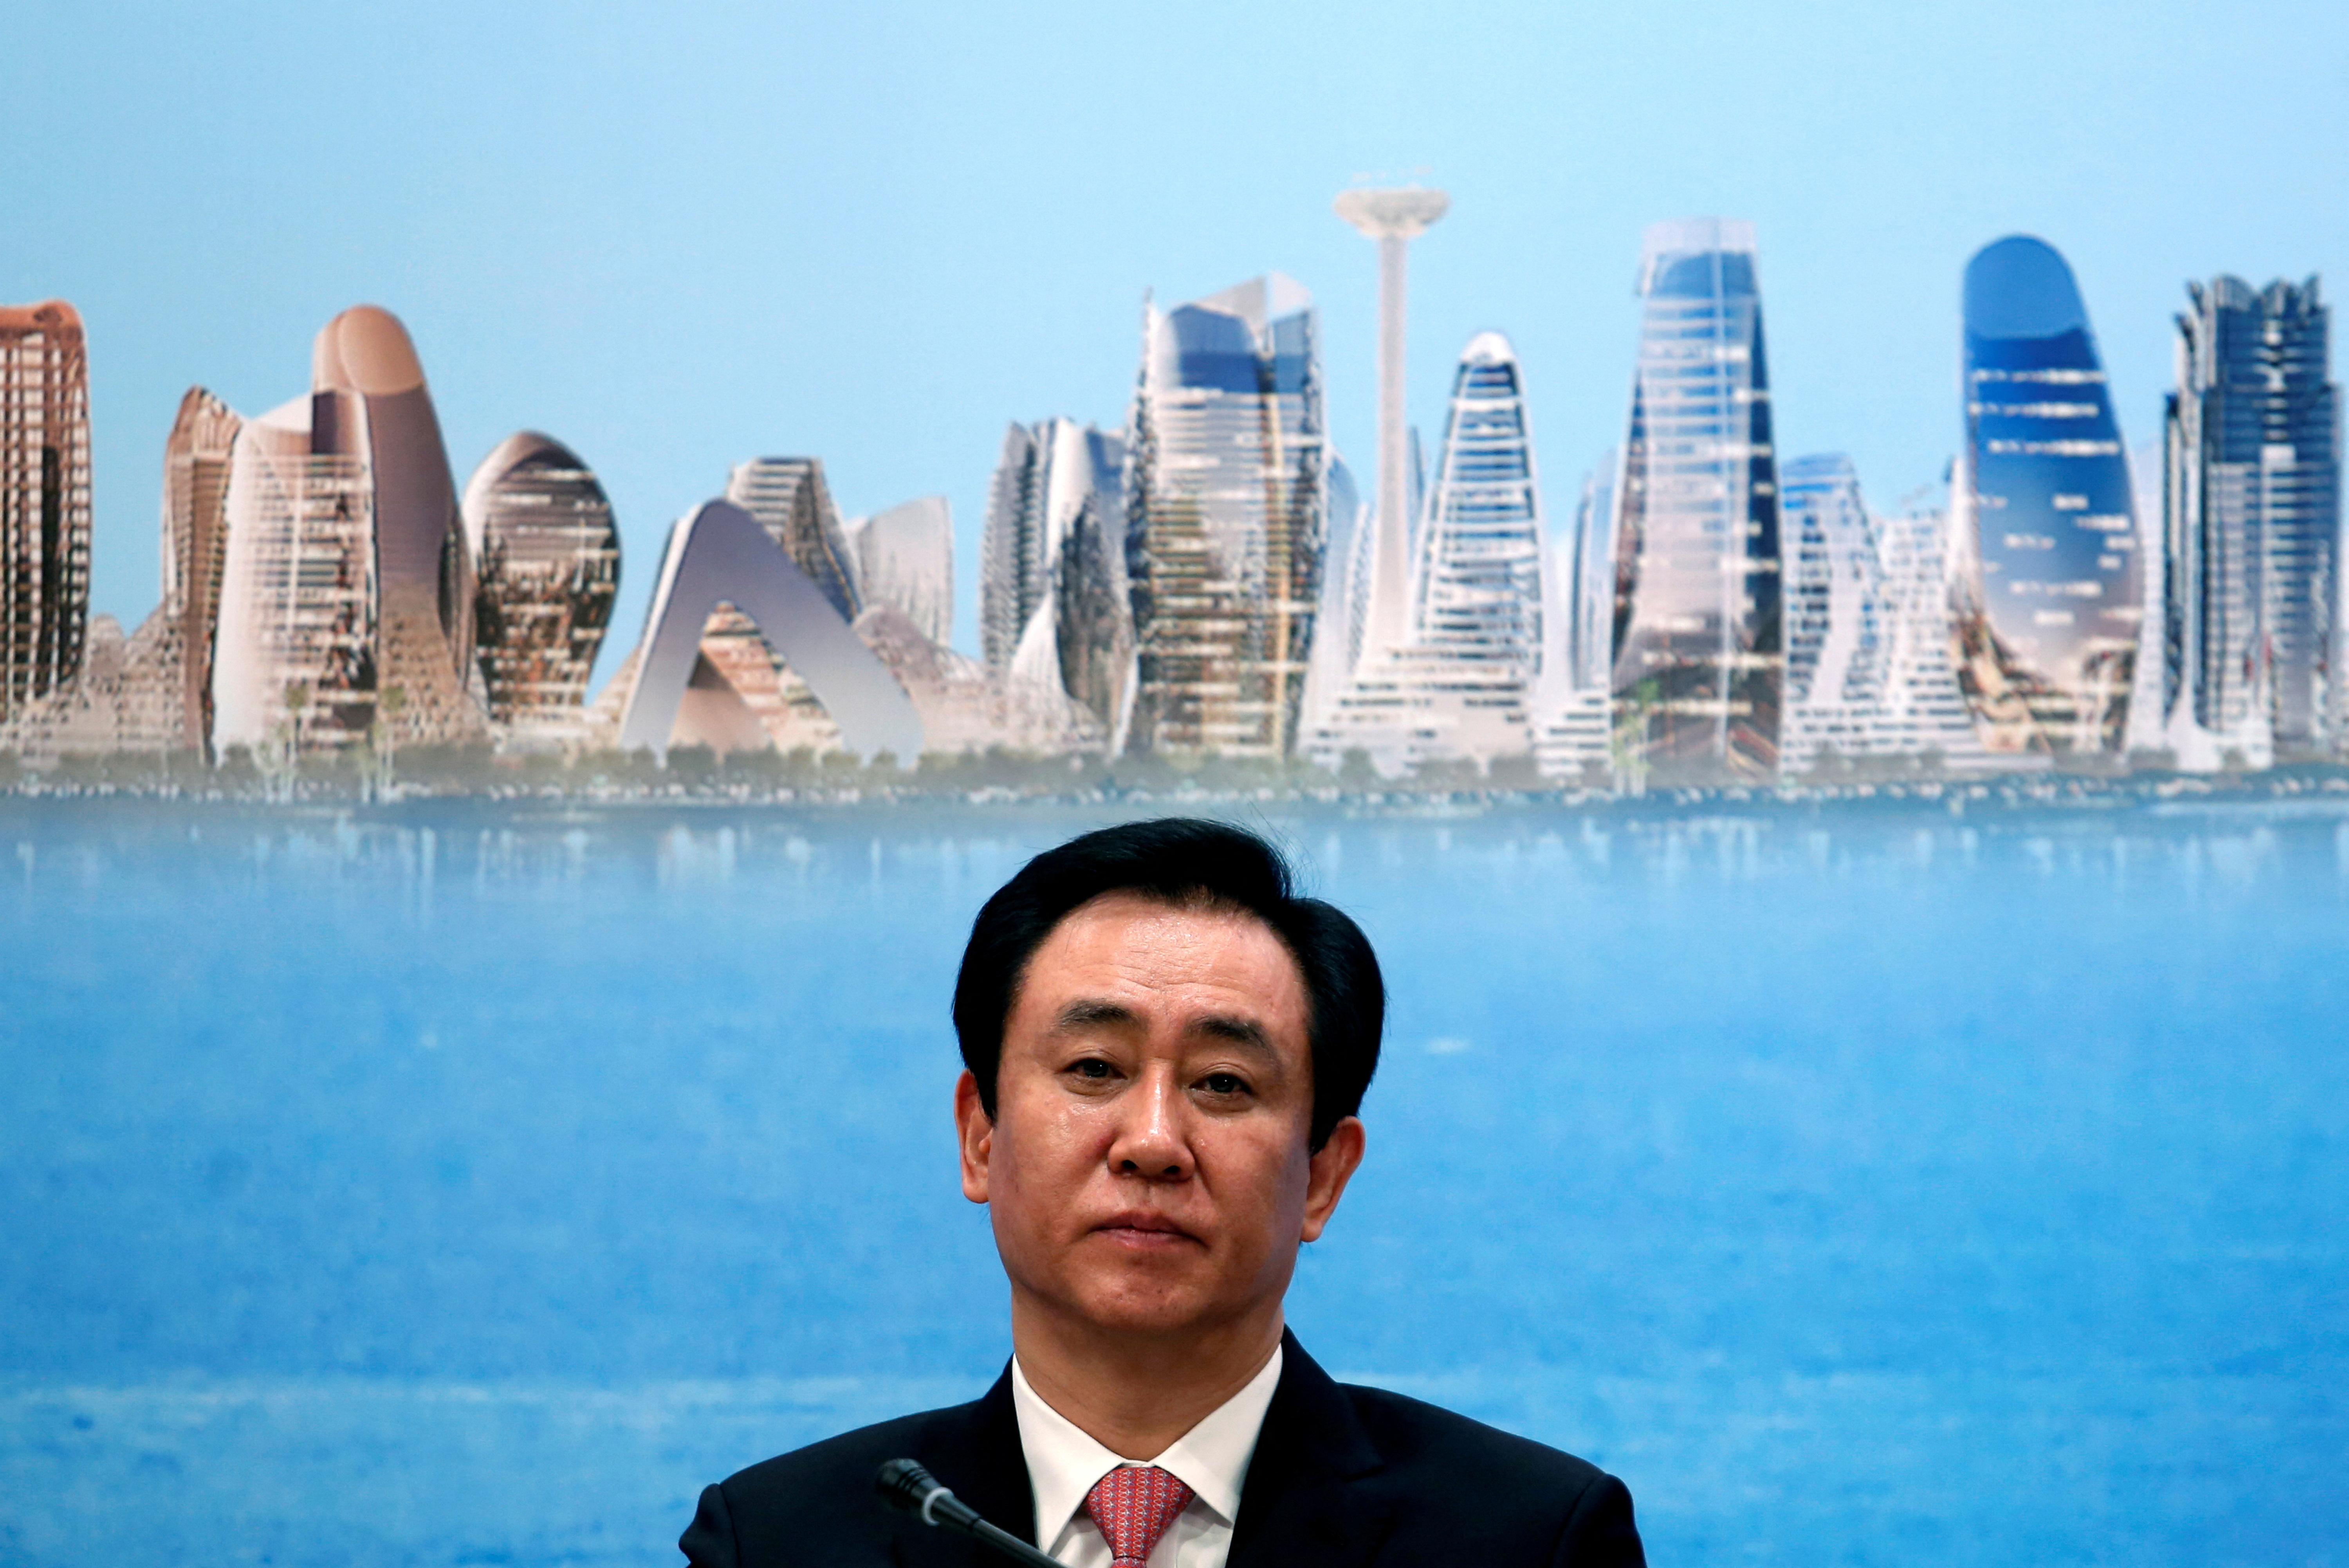 China Evergrande Group Chairman Hui Ka Yan attends a press conference on the property developer's annual results in Hong Kong